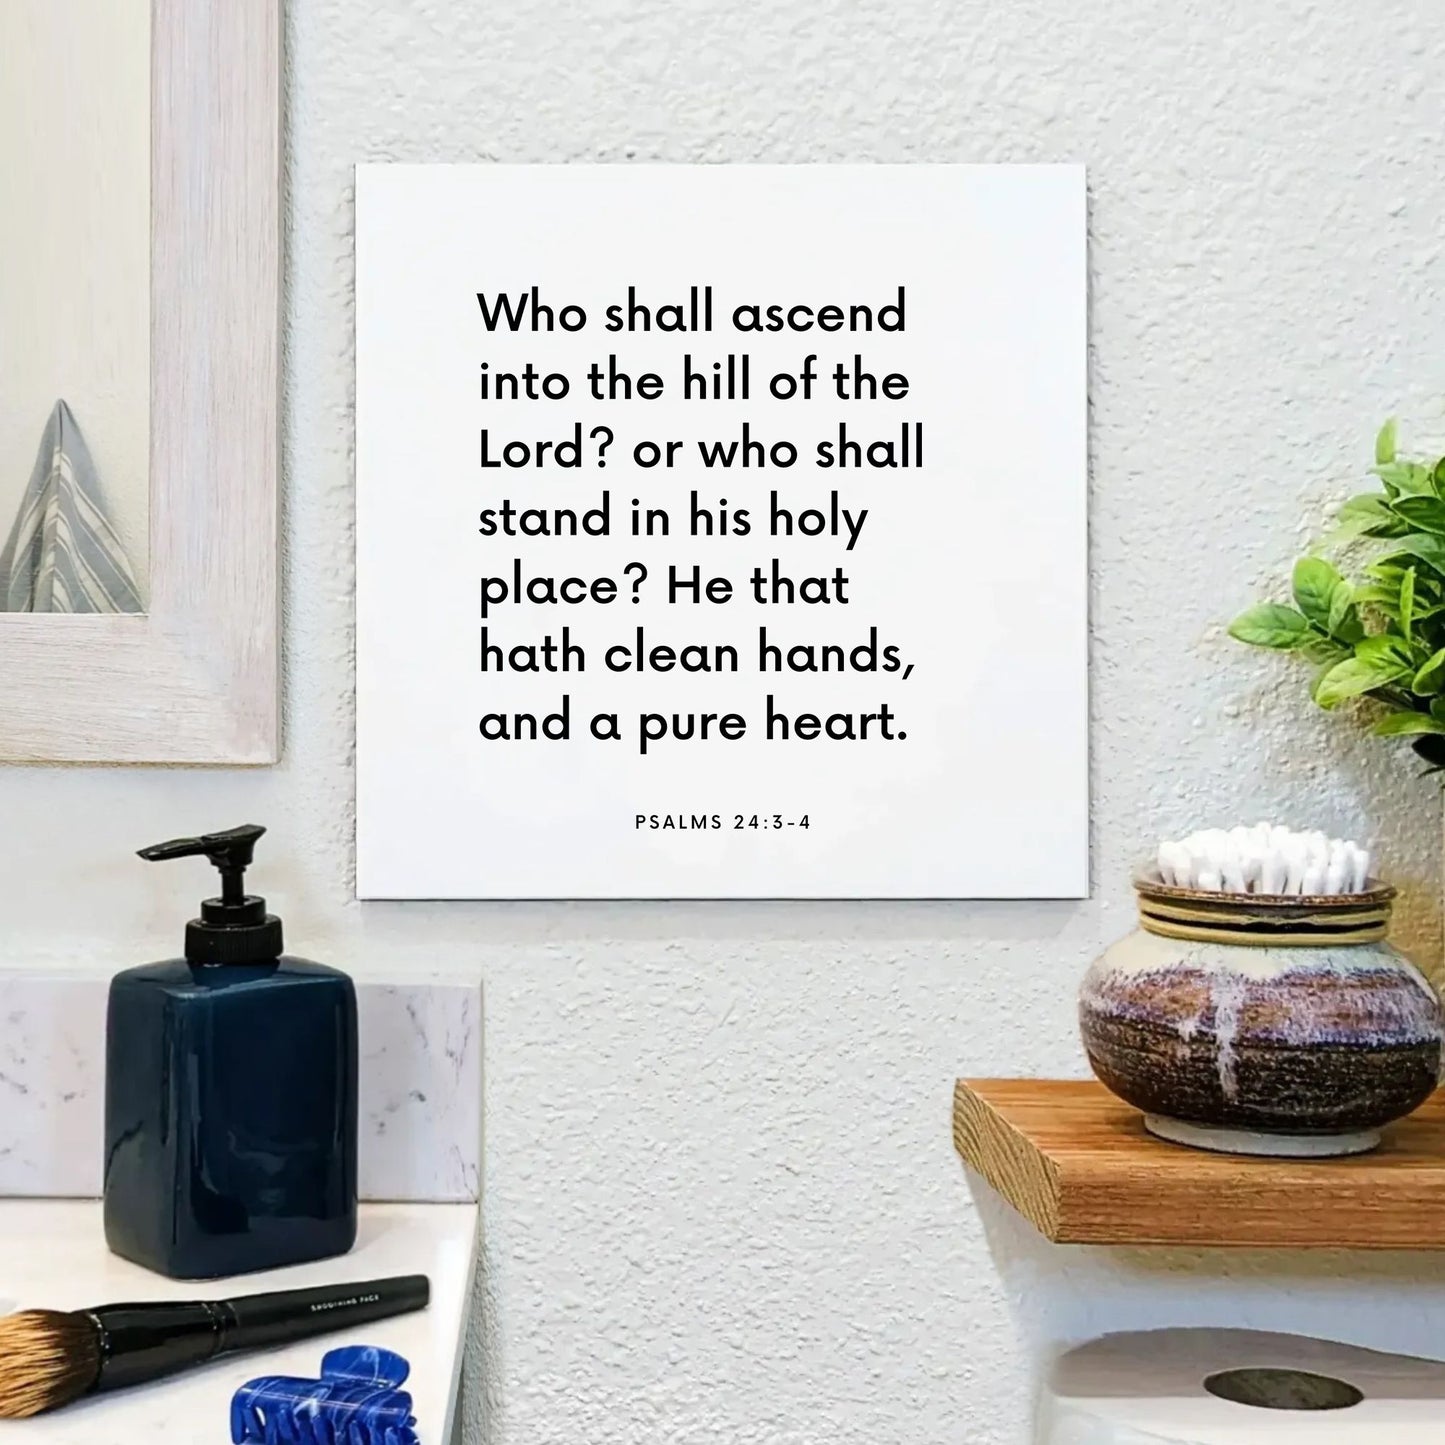 Bathroom mouting of the scripture tile for Psalms 24:3-4 - "Who shall ascend into the hill of the Lord?"